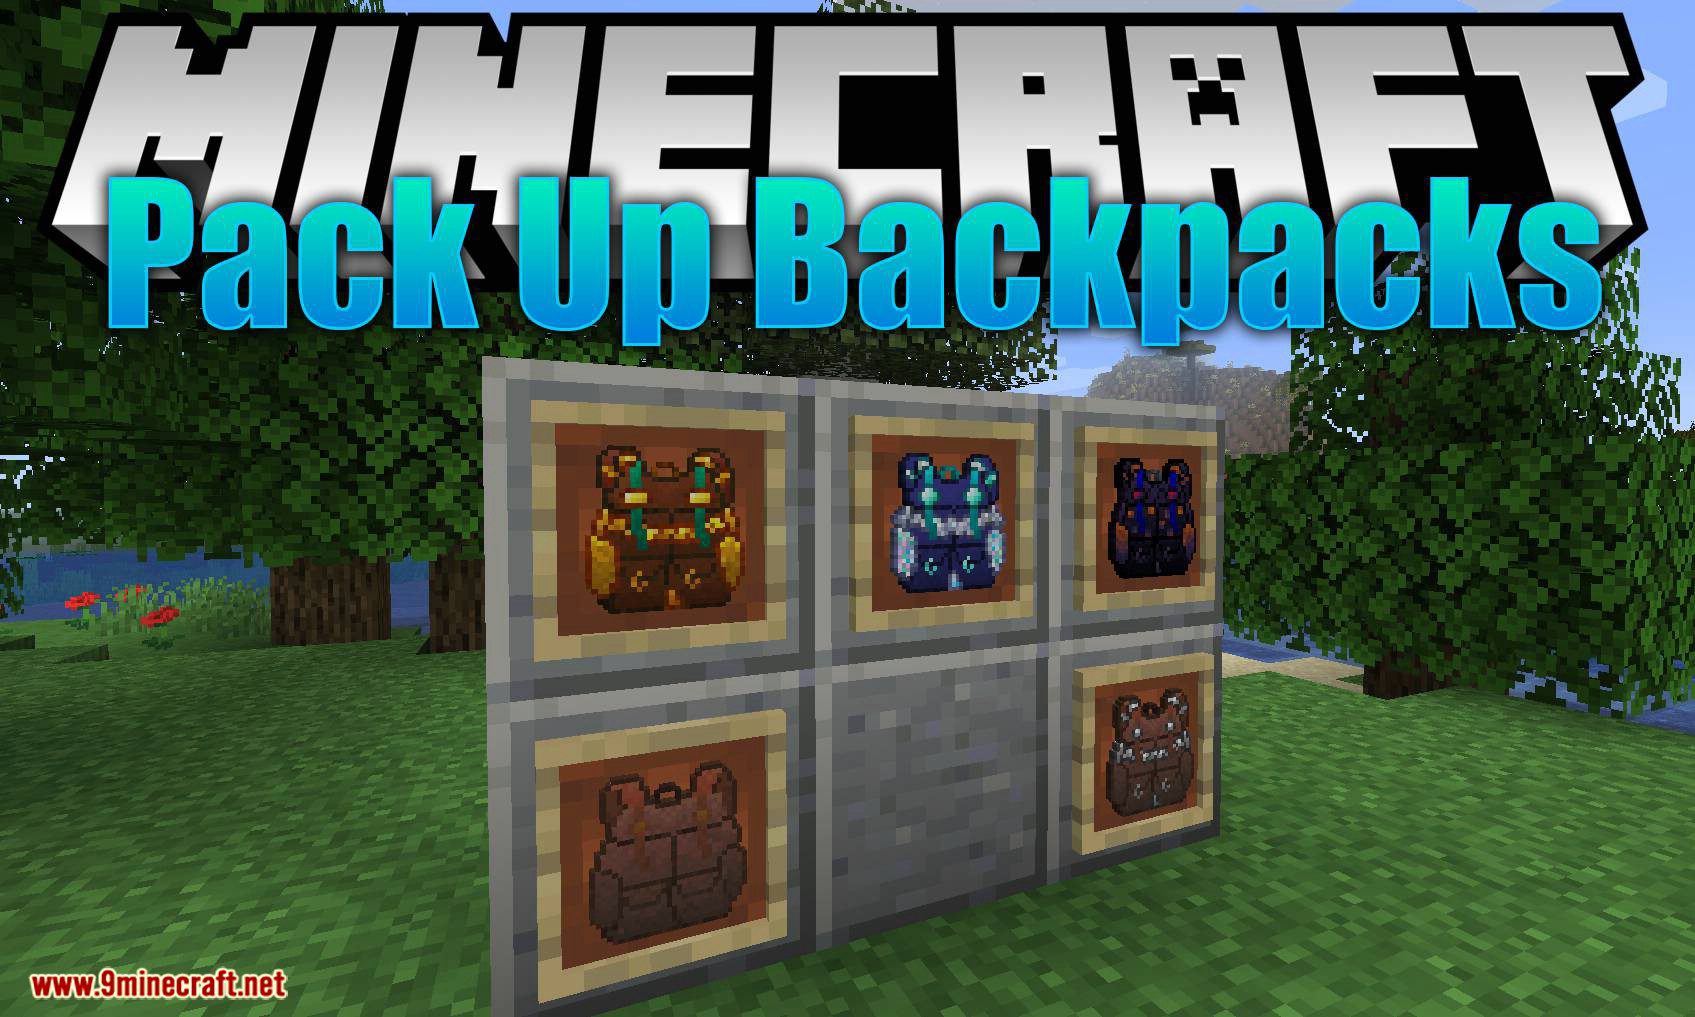 Packed Up Backpacks mod for minecraft logo